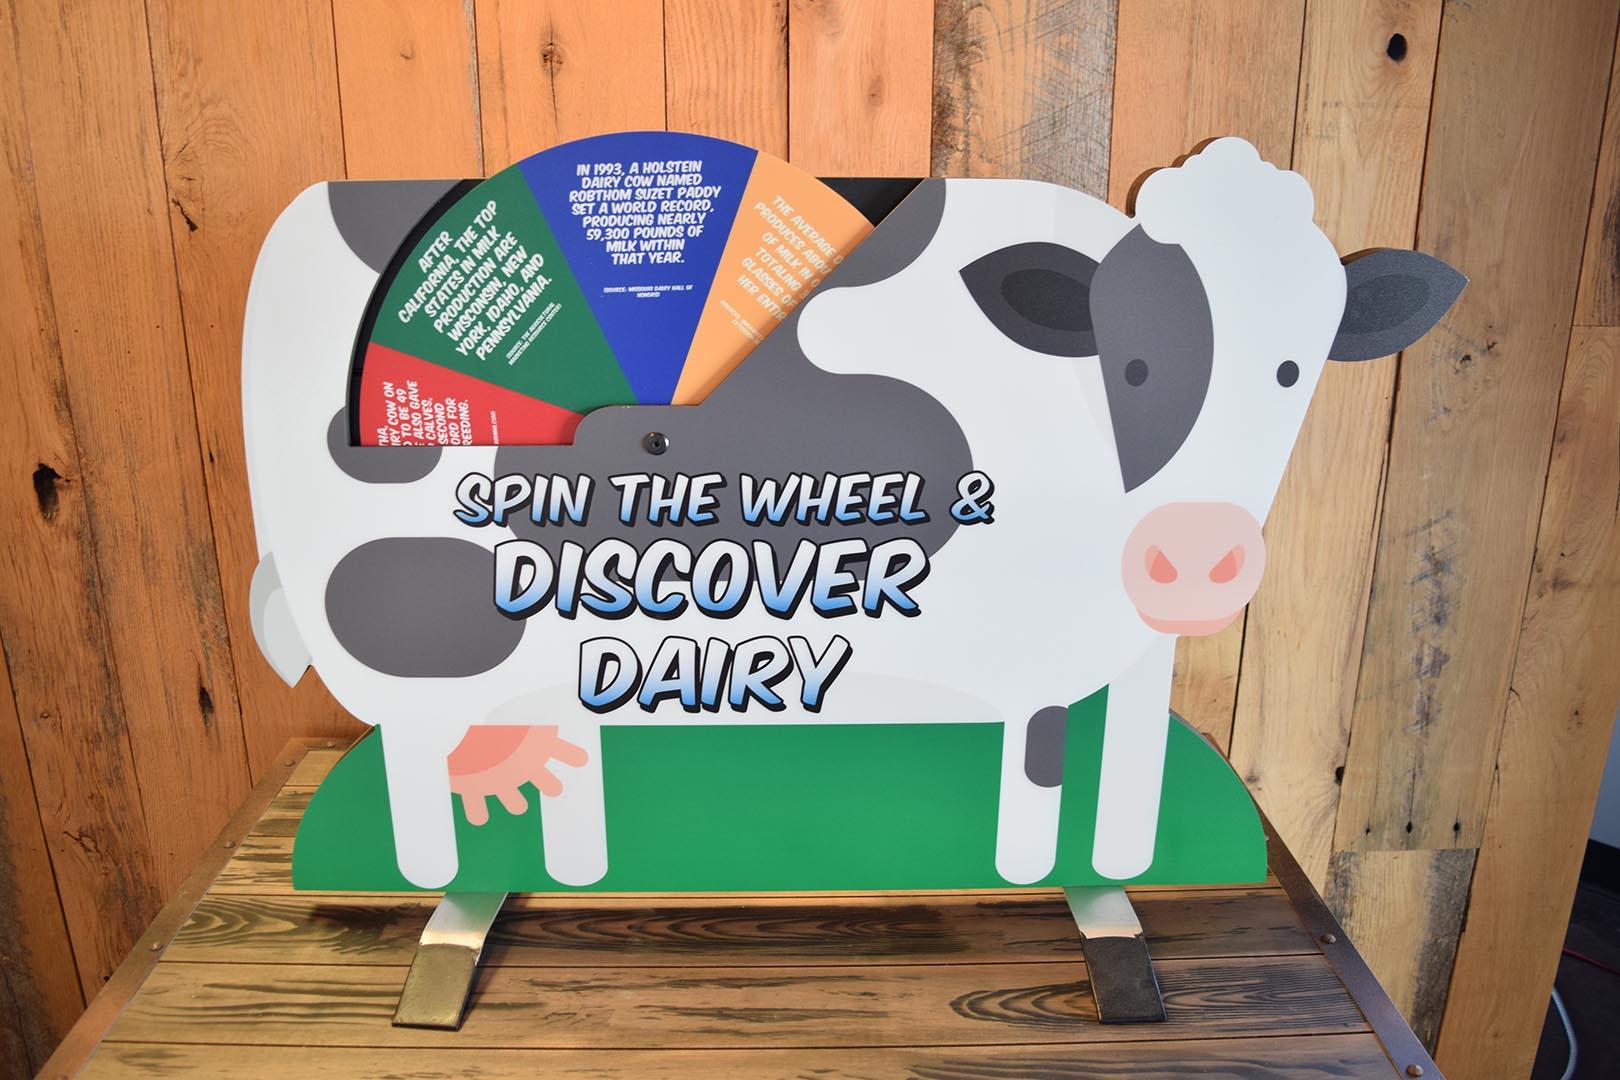 Tabletop Dairy Cow Standup